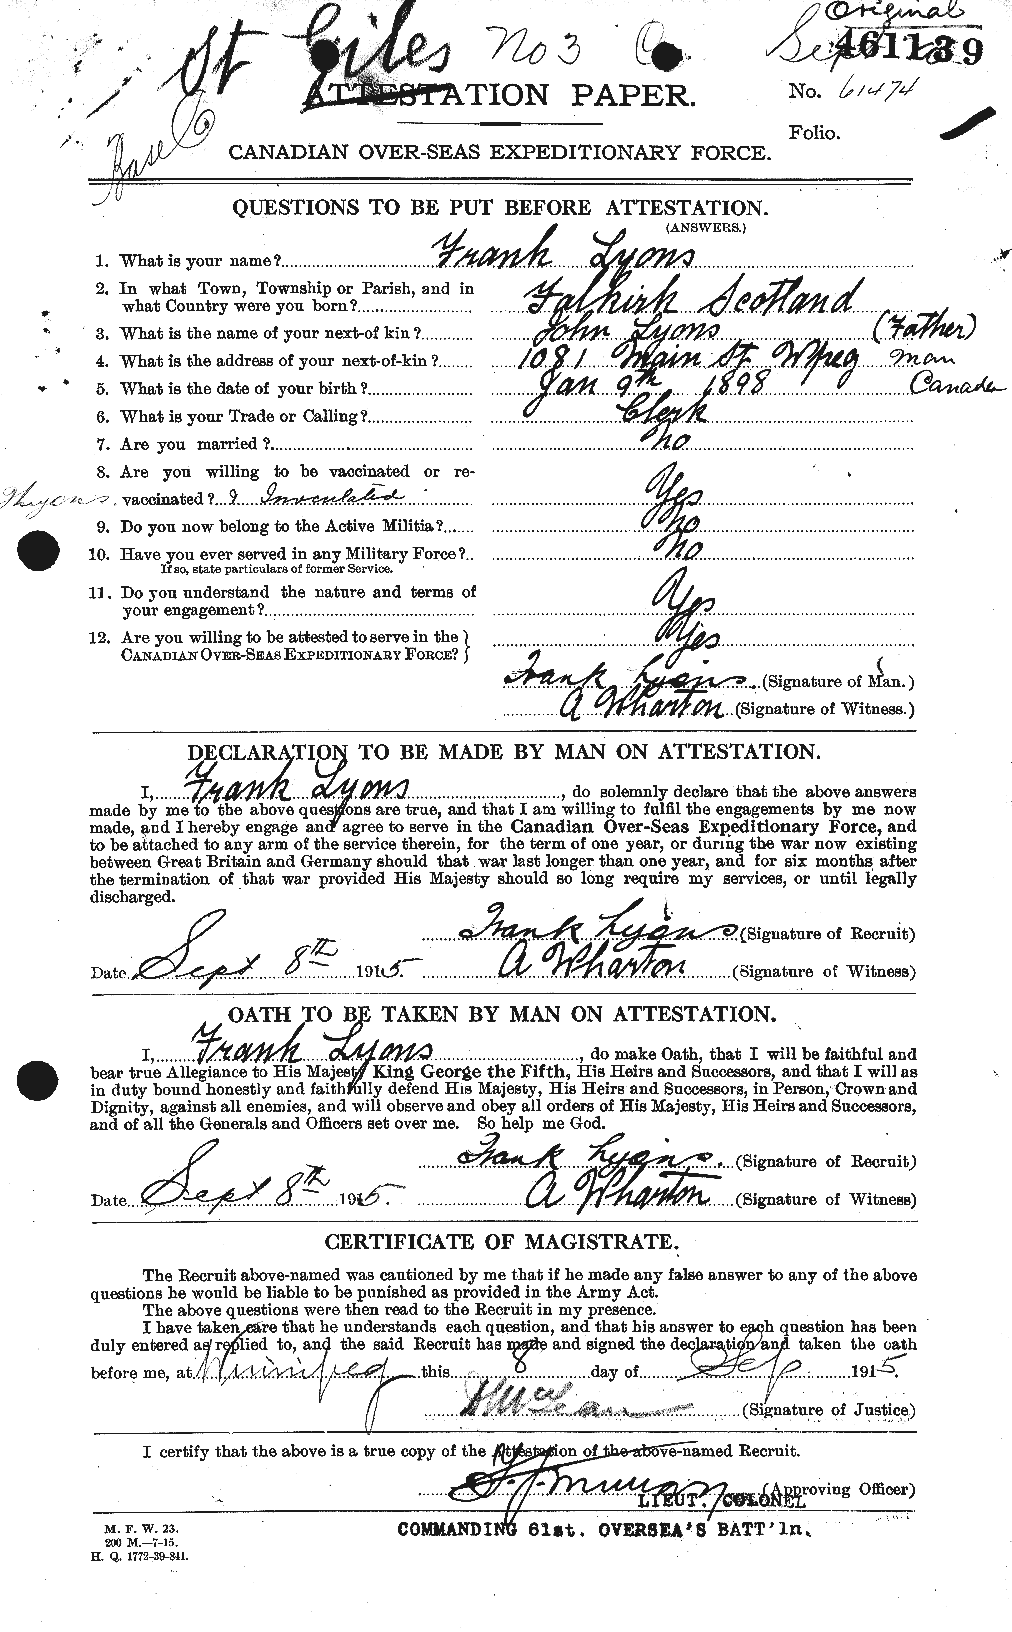 Personnel Records of the First World War - CEF 473055a